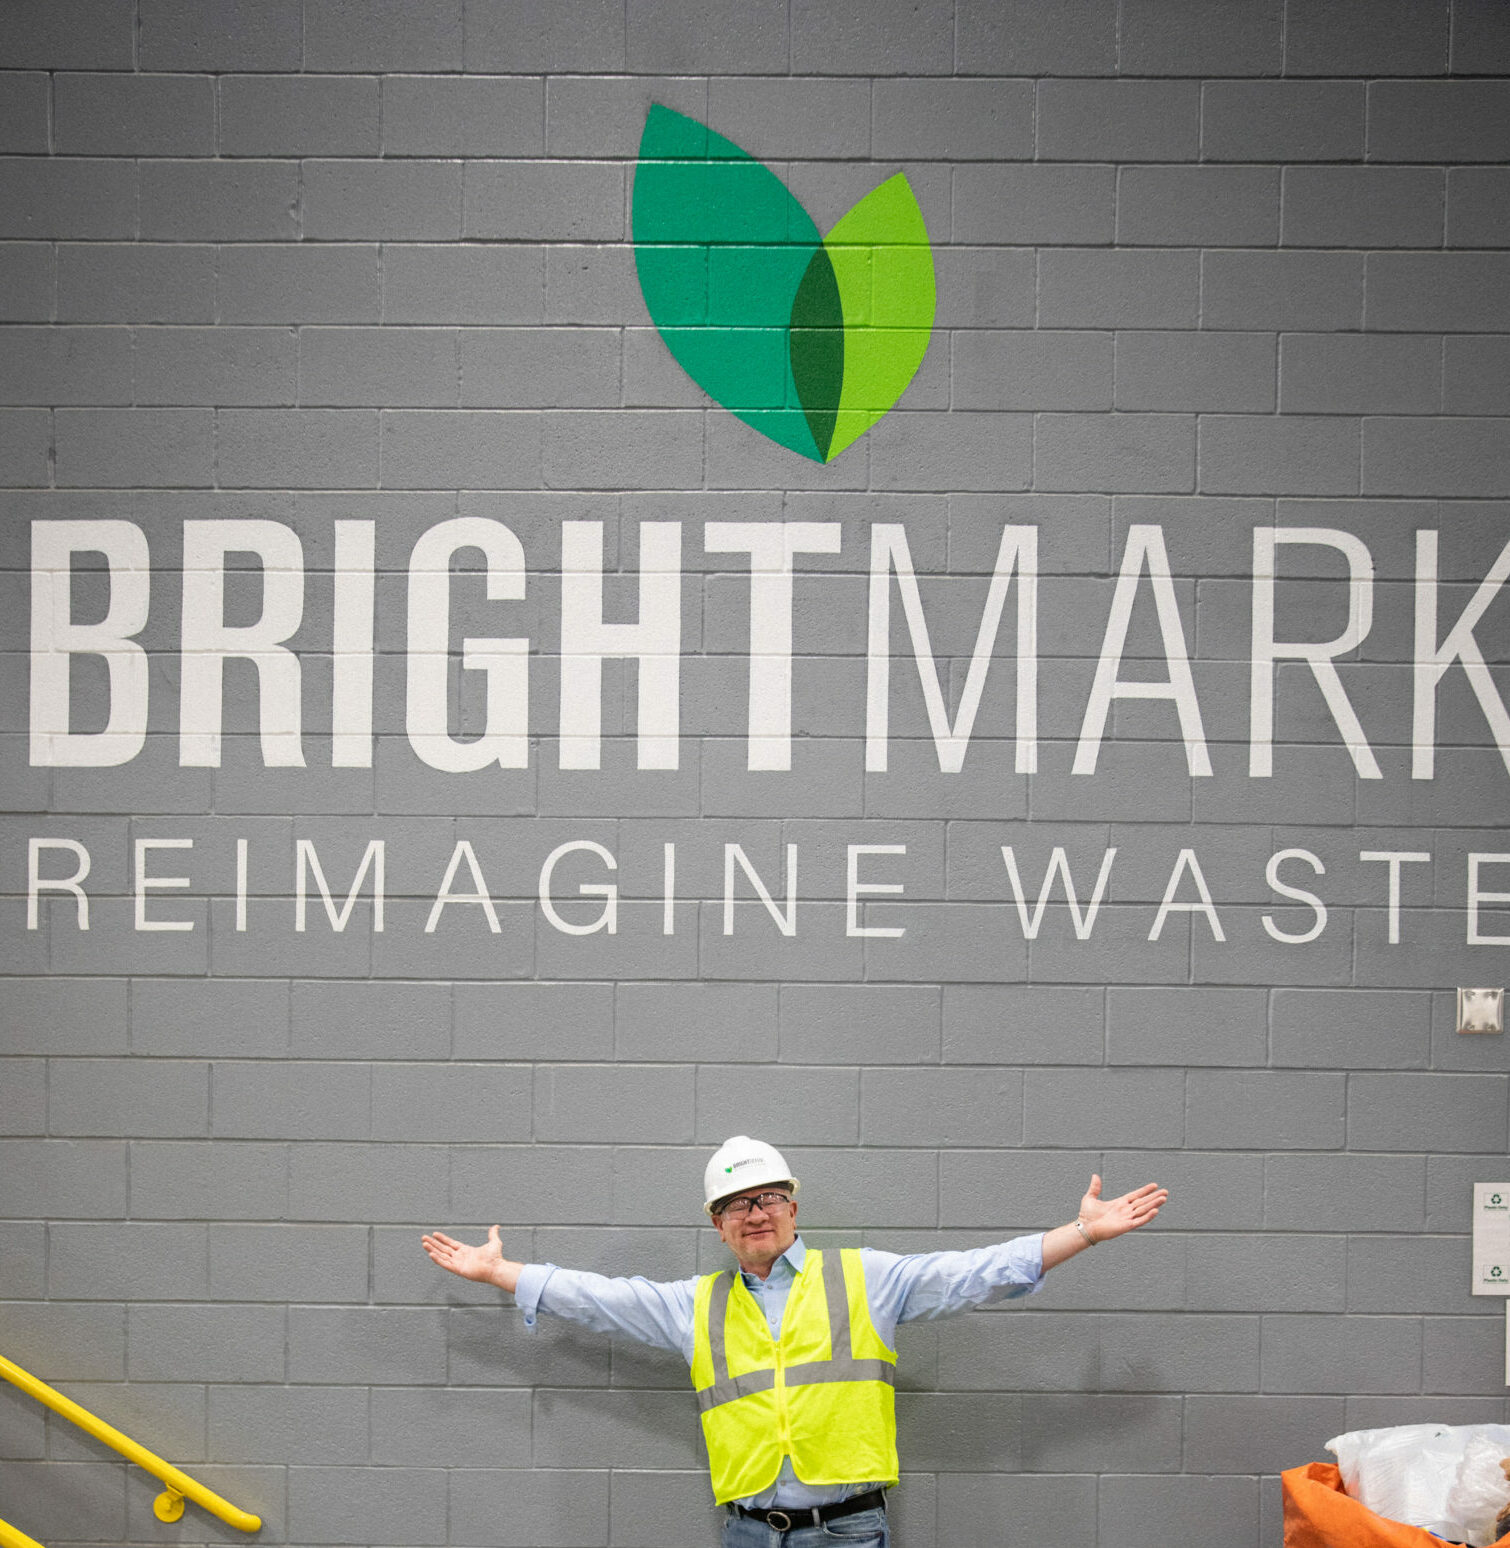 CEO Bob Powell standing in front of the new Brightmark logo painted on the wall